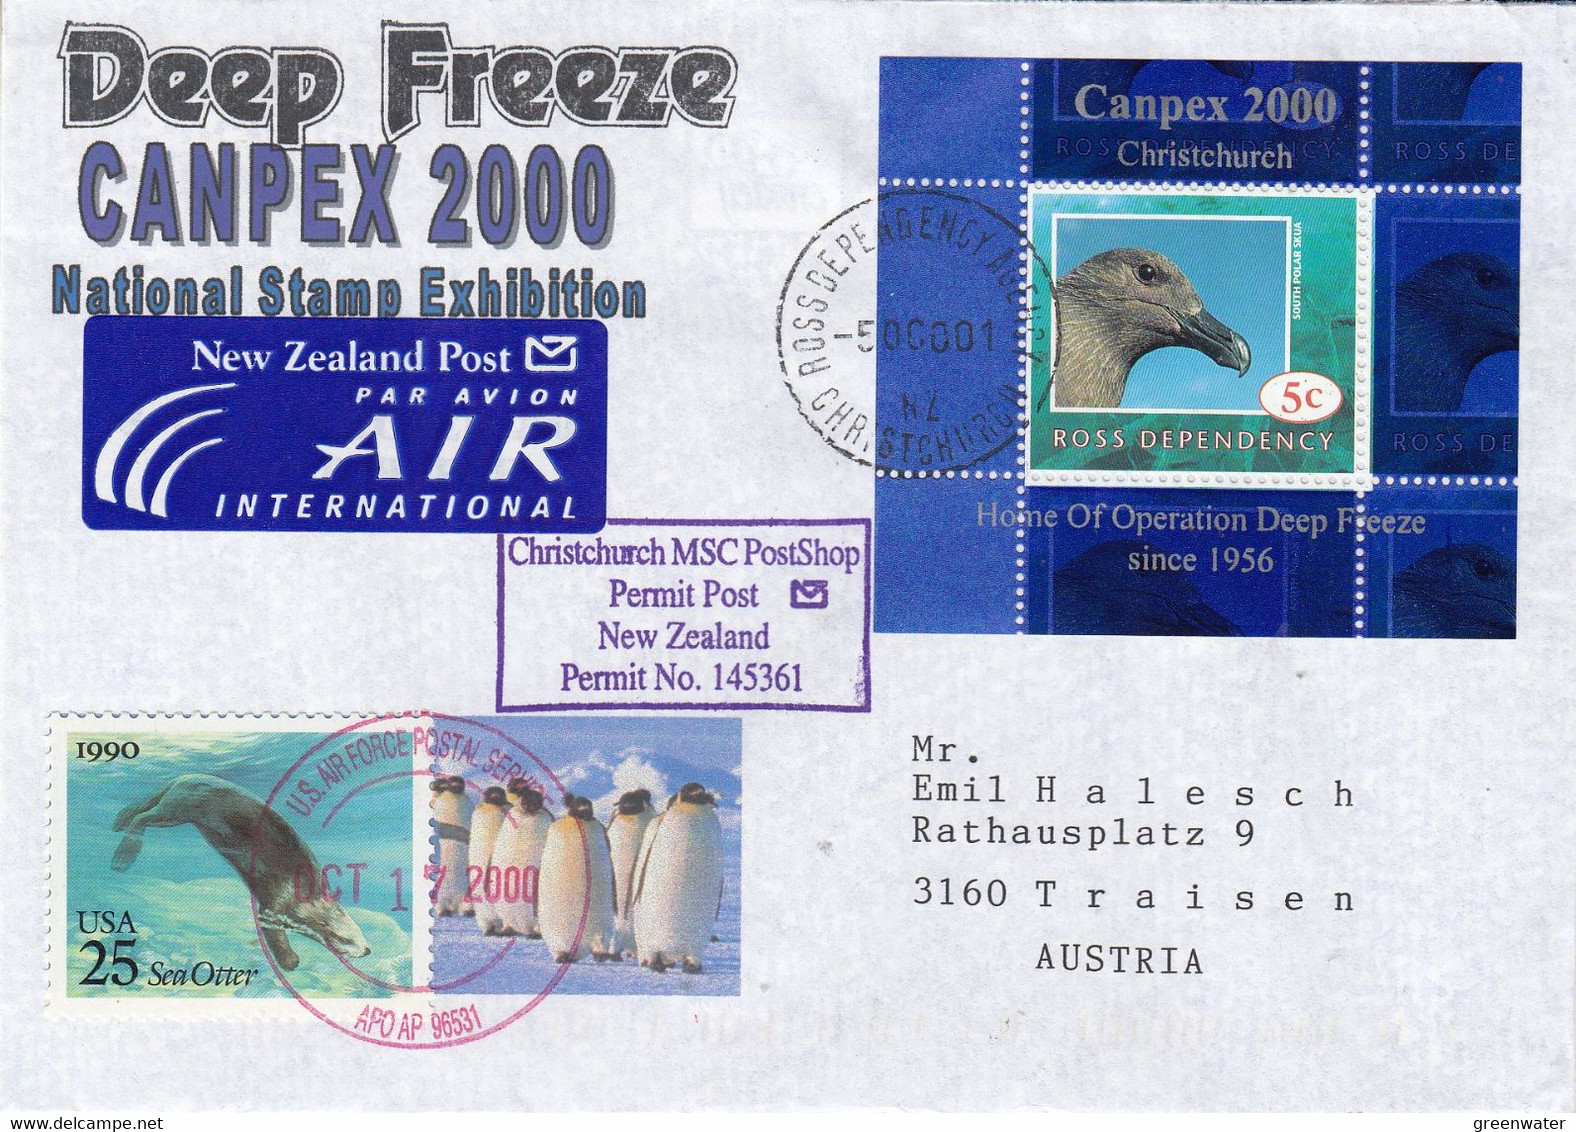 Ross Dependency 2000 Canpex Deep Freeze Ca Ross Dependency Christchurch 5 OCT 2001 Ca US Air Force (GPA121C) - Covers & Documents